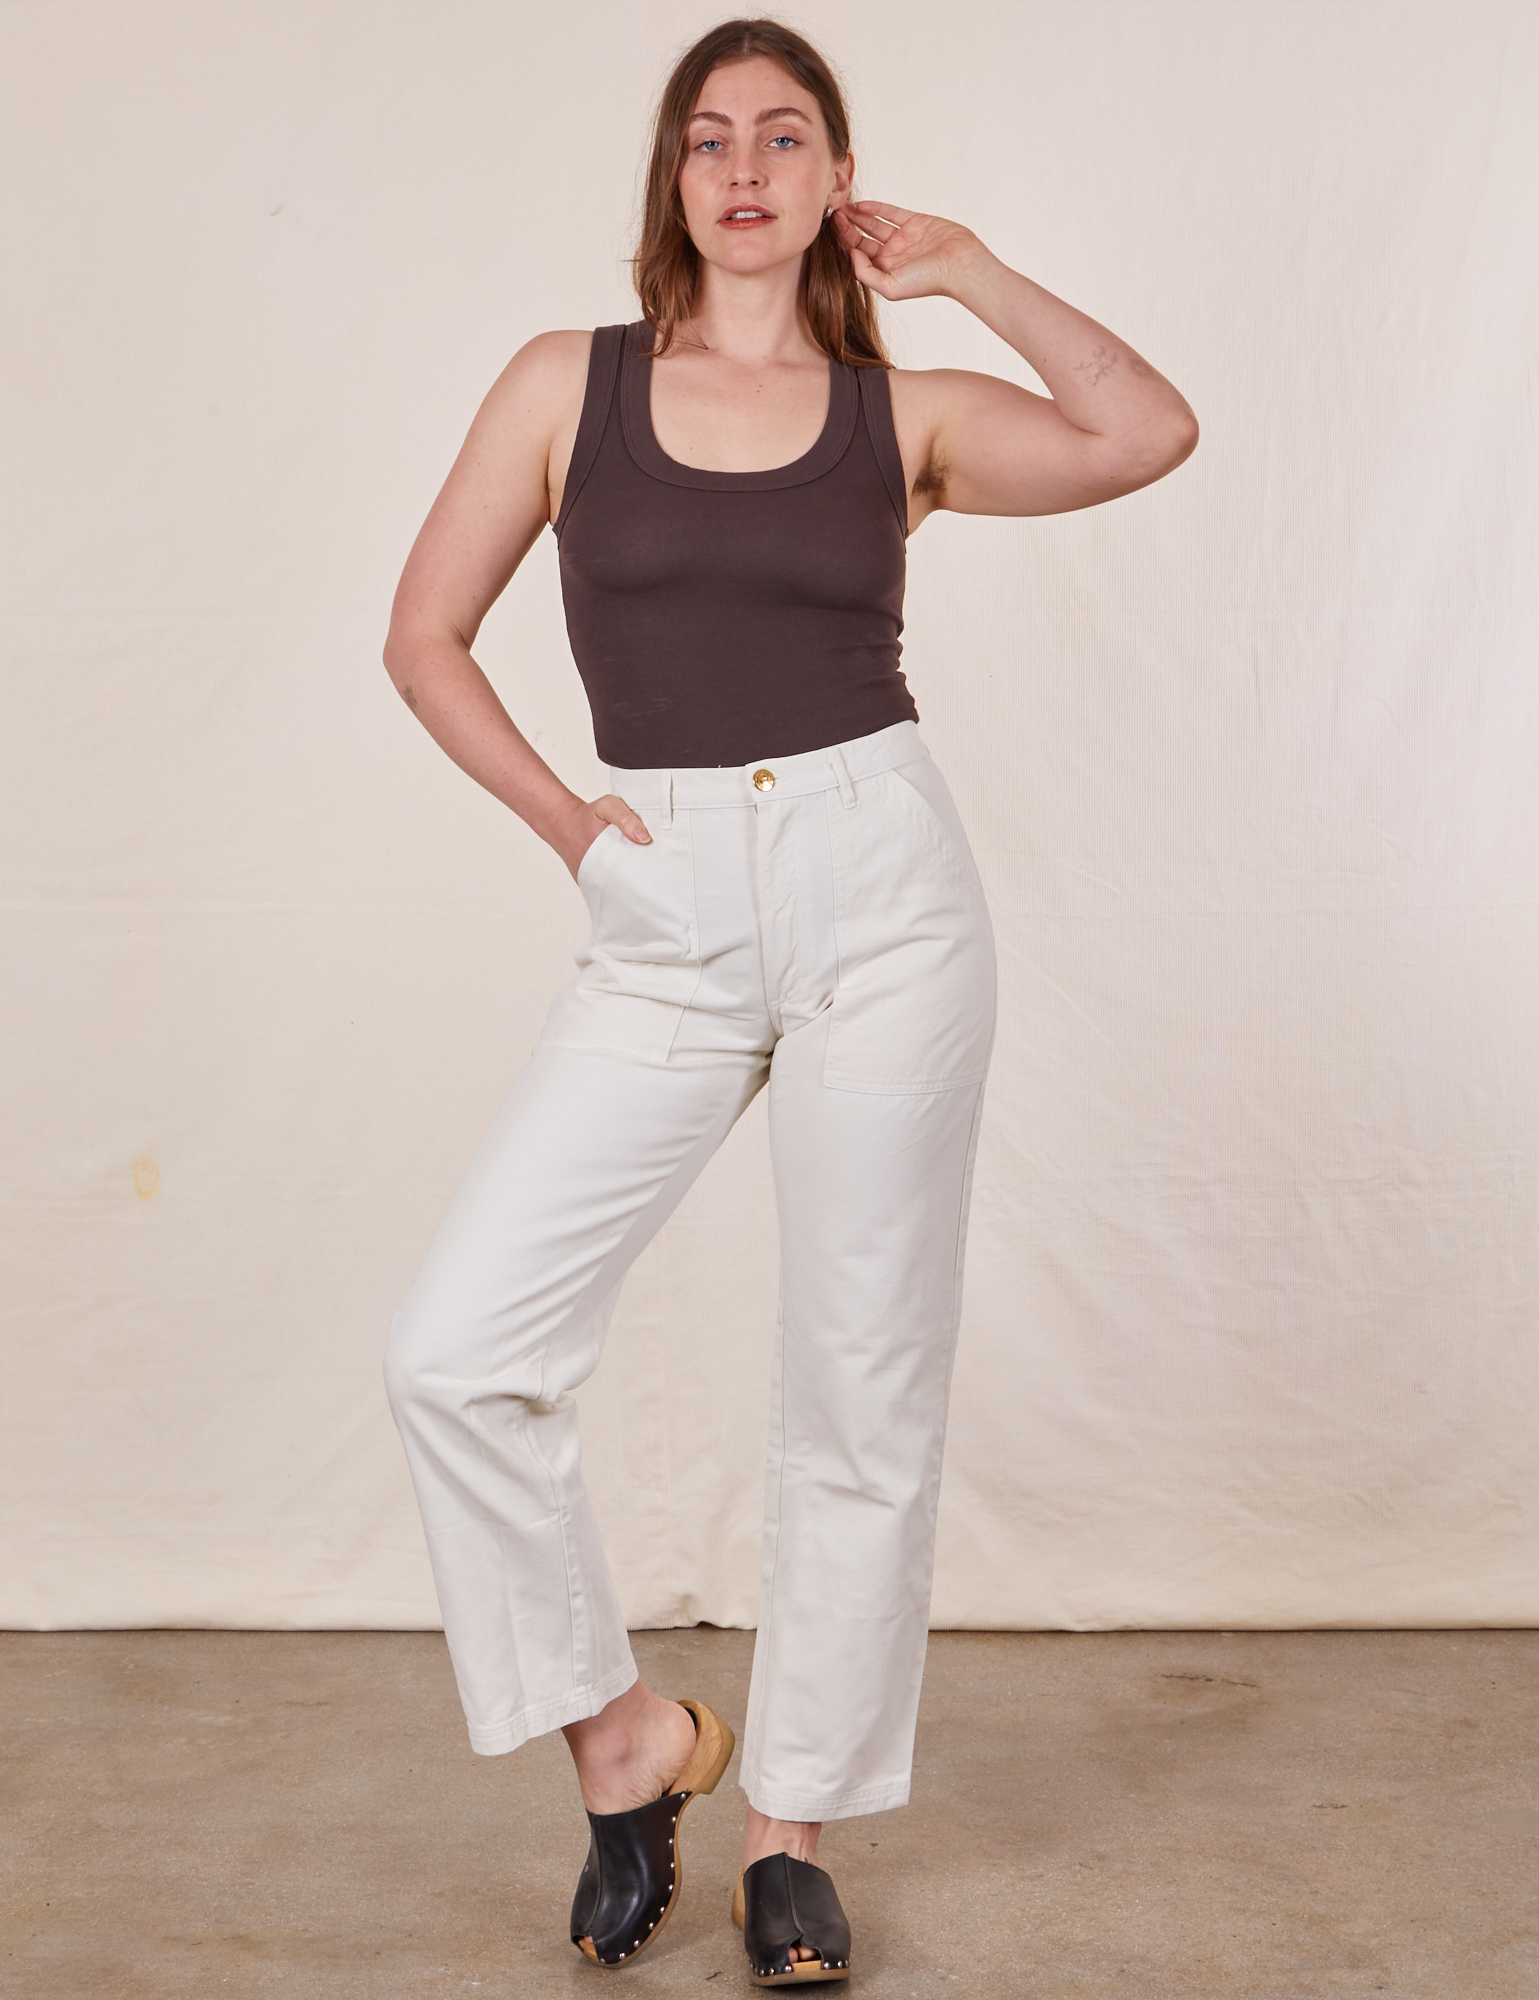 Allison is 5&#39;10&quot; and wearing Long S Work Pants in Vintage Tee Off-White paired with espresso brown Tank Top